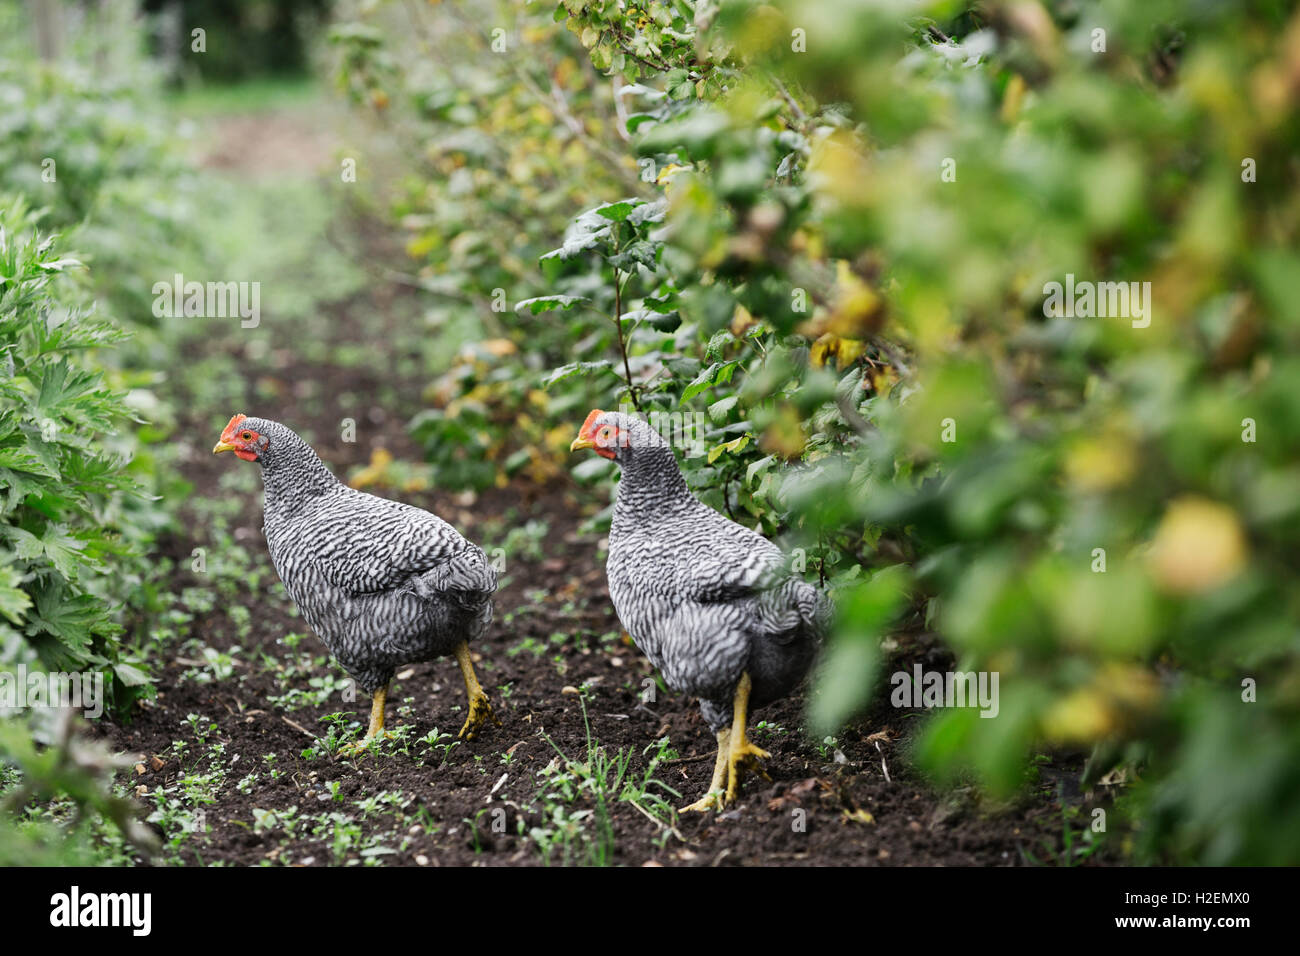 Two black and white Sussex chickens in a flowerbed. Stock Photo